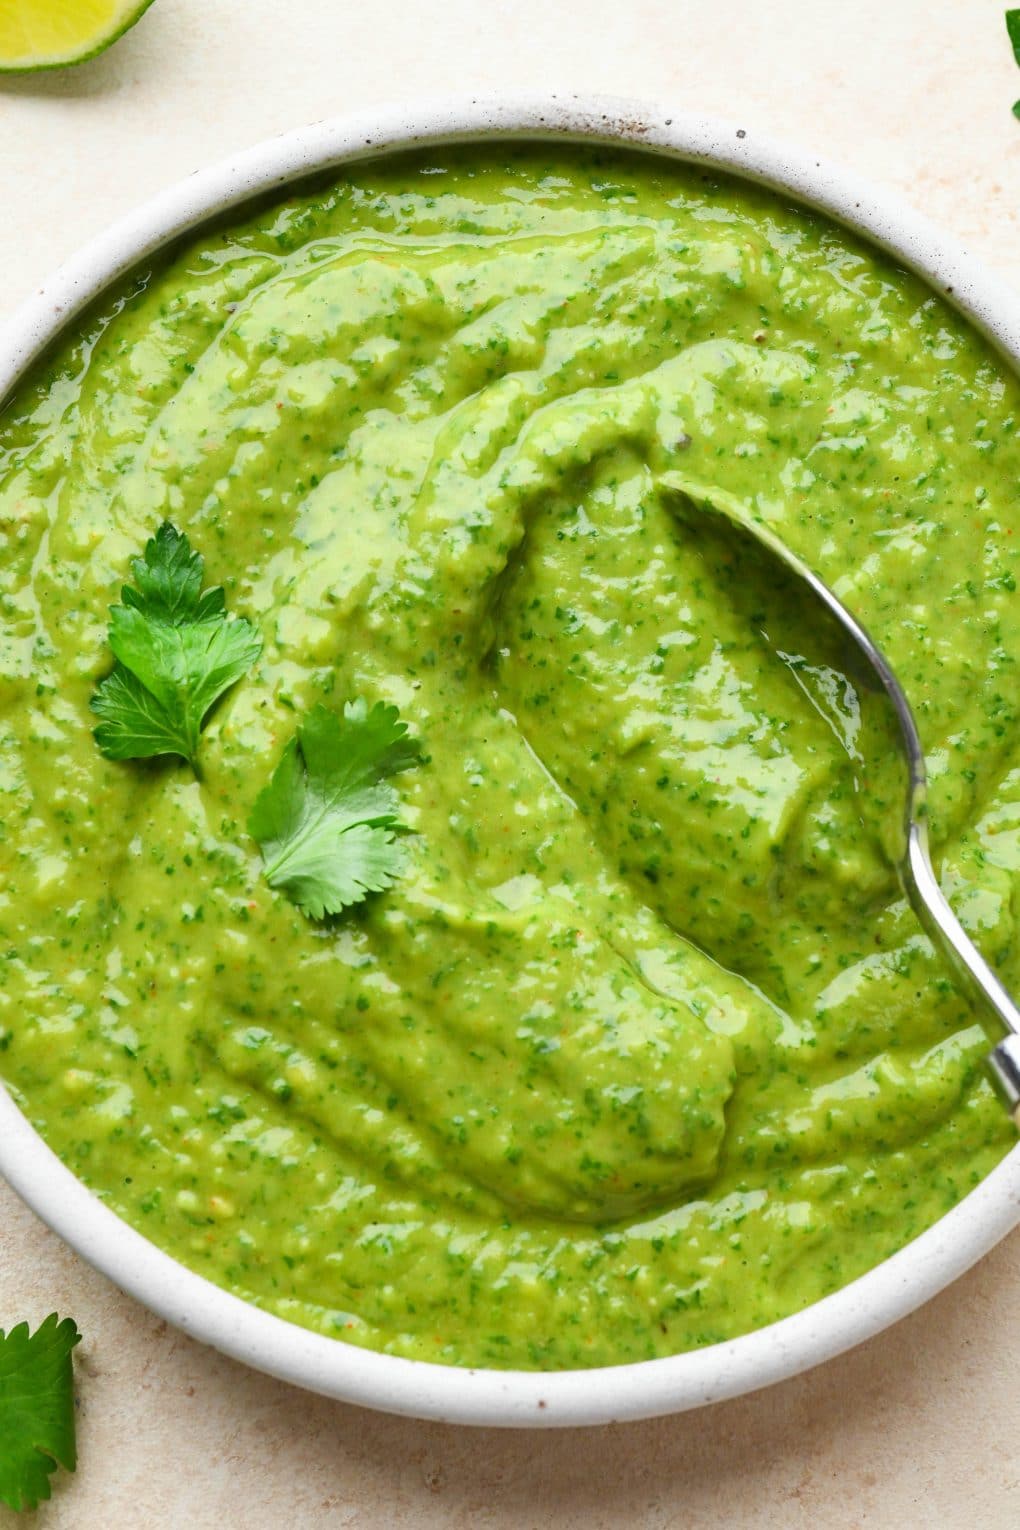 A spoon dipping into a small bowl of bright green avocado herb green sauce.